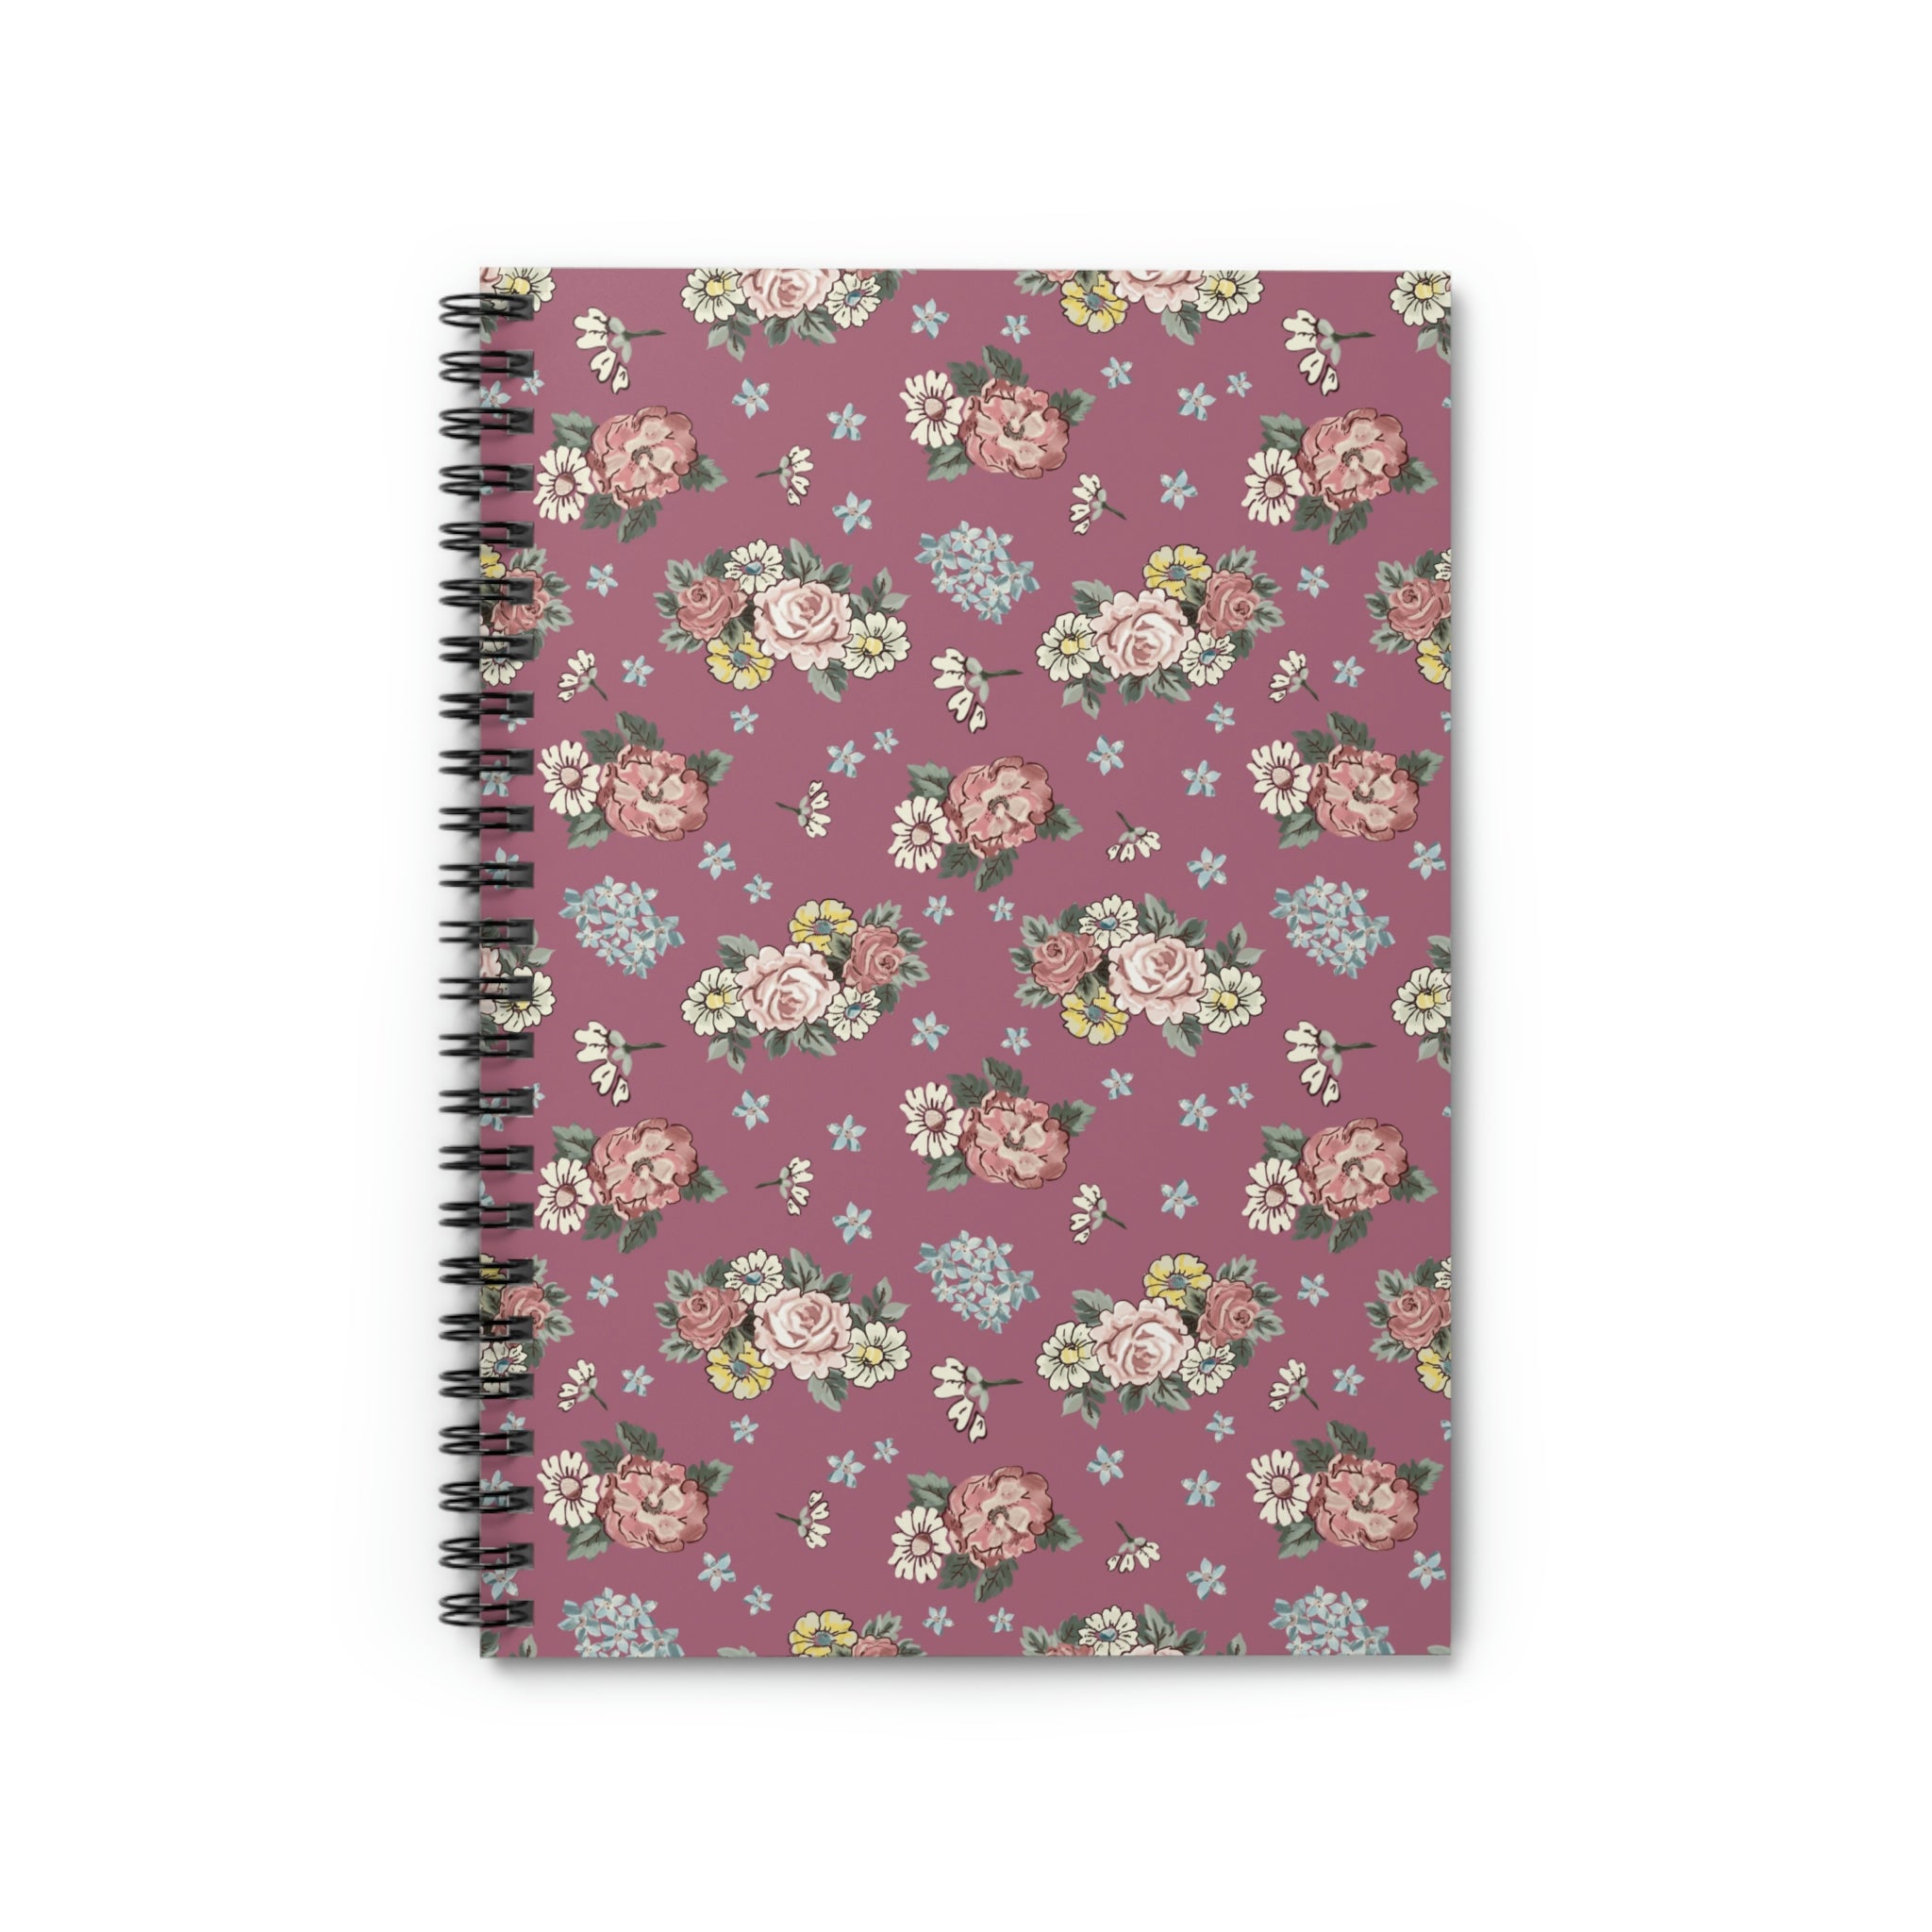 Spiral Notebook - Ruled Line / berry floral